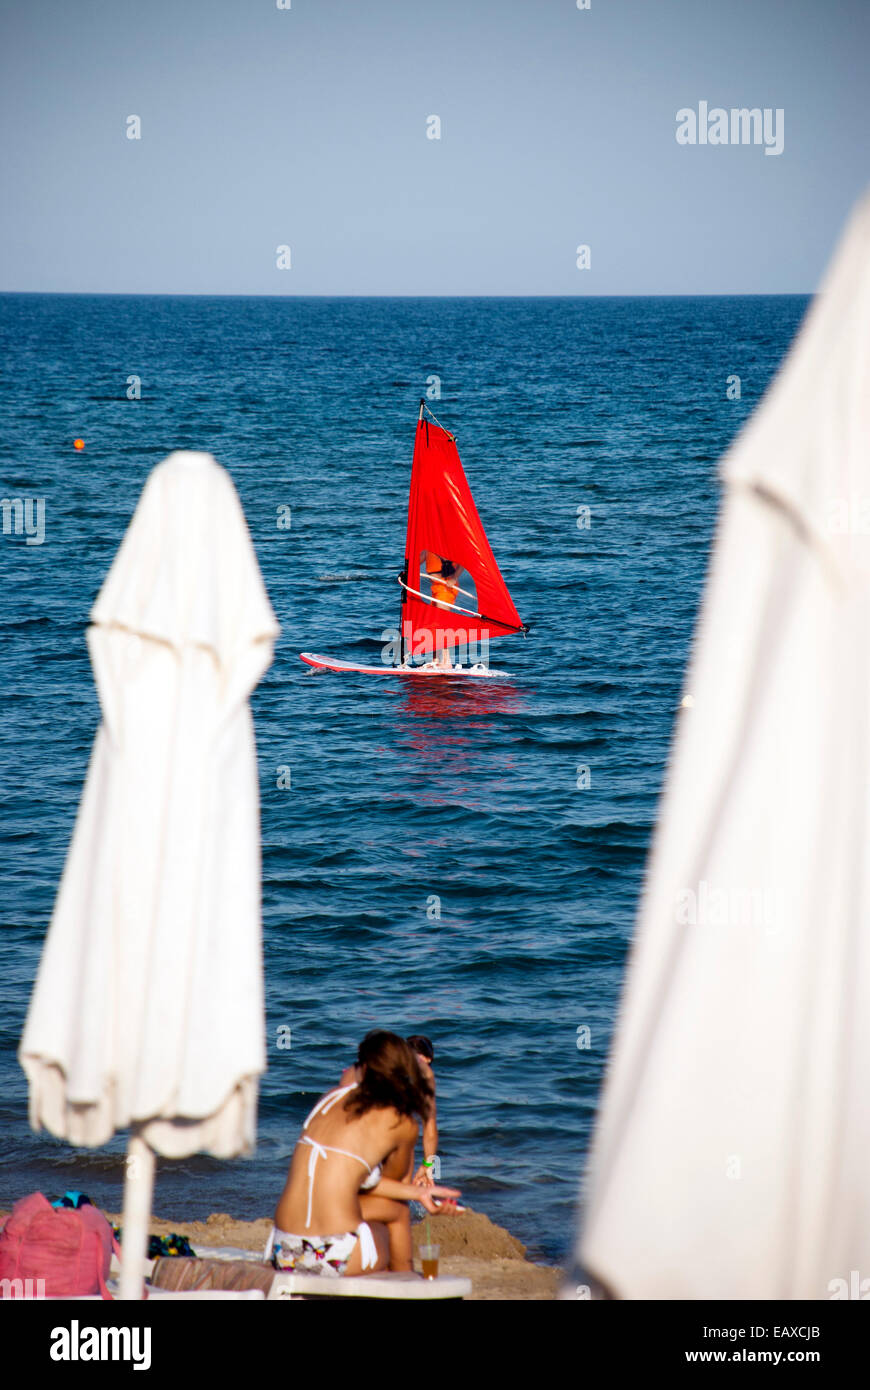 Sunny Beach, Bulgaria - July 15, 2011: A wind surfer is having a ride with his surf at Bulgaria's Black sea while a woman is wat Stock Photo